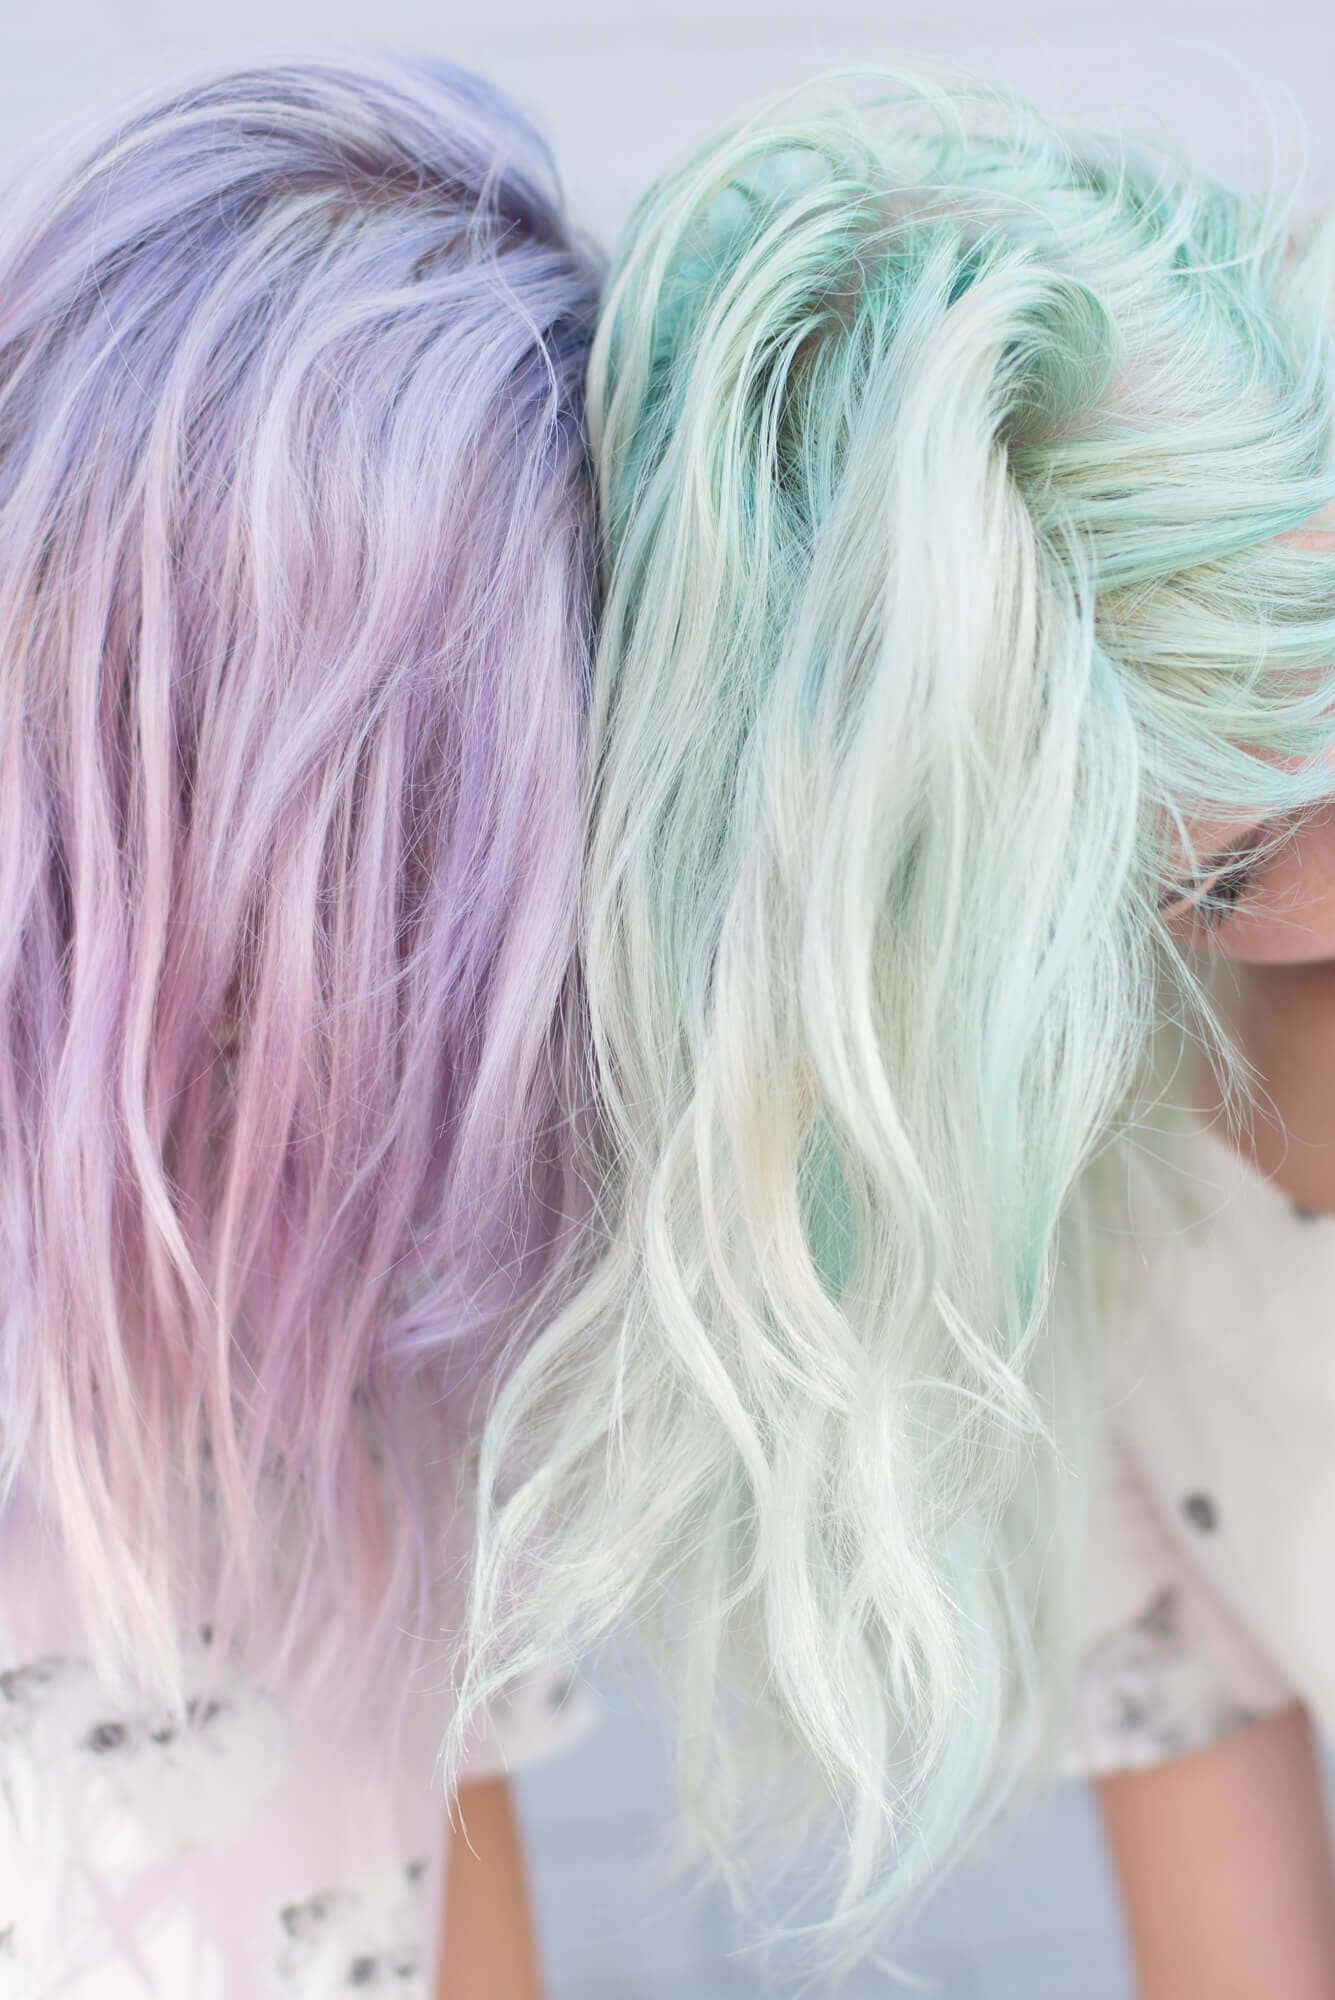 Two Friends with Pastel Hair